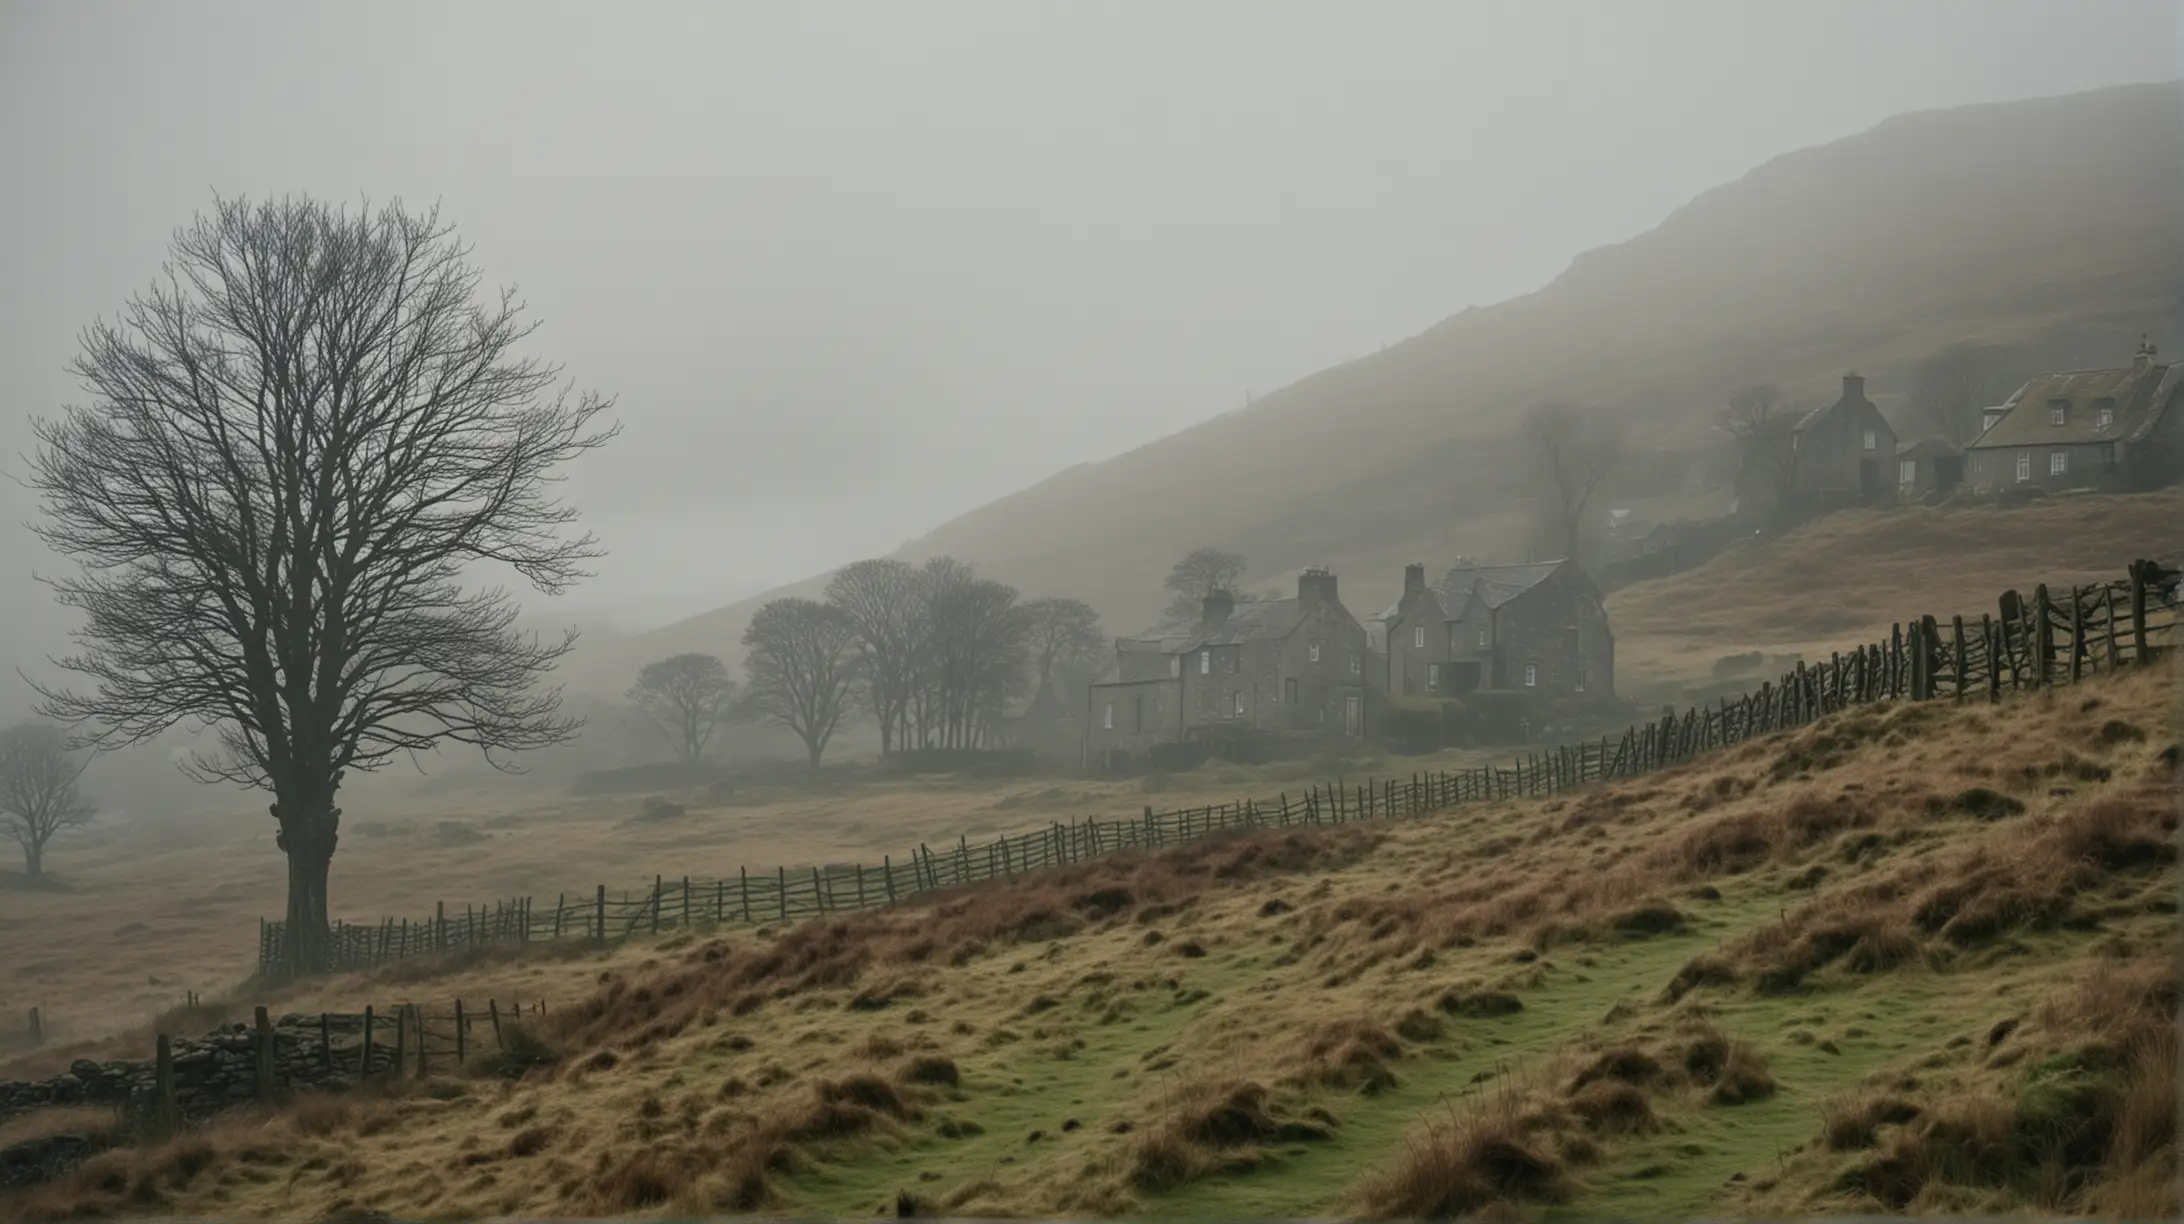 I'm creating a lookbook for a mystery thriller movie centered around Detective Sergeant Cora Lear. The first image should capture the eerie, mist-covered landscape of rural Scotland, setting the stage for a tale of murder, secrets, and betrayal. Picture rolling hills, ancient stone houses, and a dense, foreboding forest, all shrouded in early morning fog. The atmosphere is thick with suspense and the haunting beauty of the Scottish countryside.